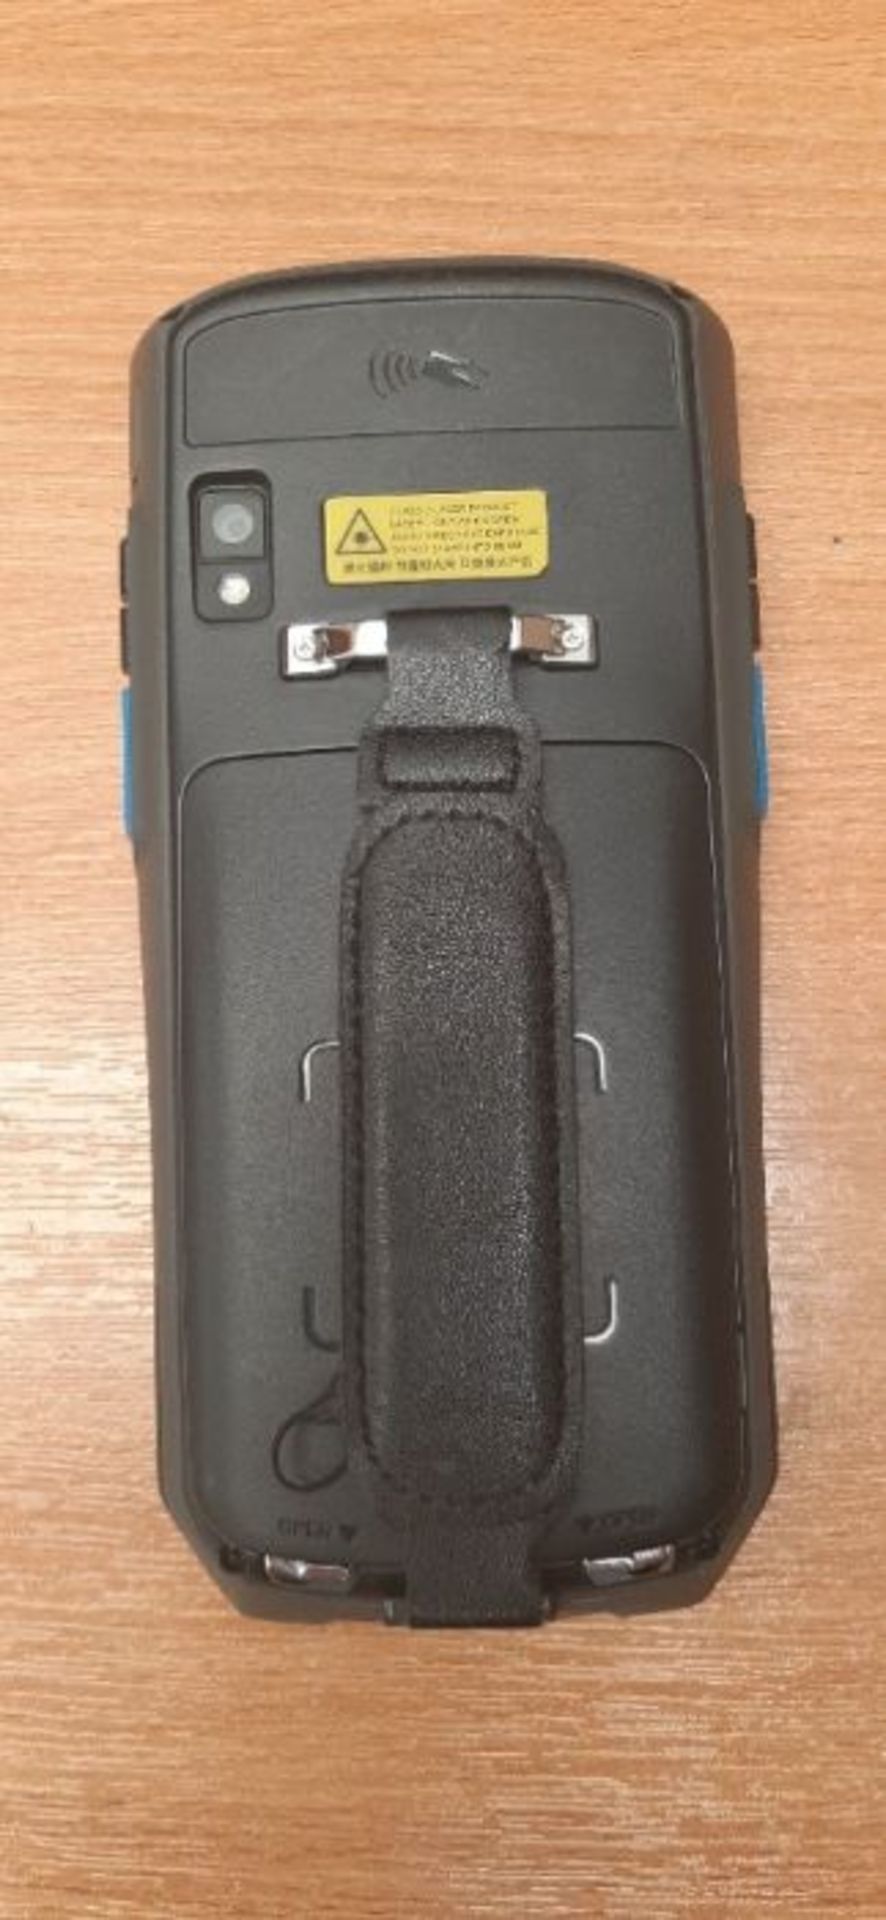 RRP £390.00 [Warehouse Scanner] Rugged Handheld Barcode Scanner Mobile Computer IP65 with Android - Image 3 of 3